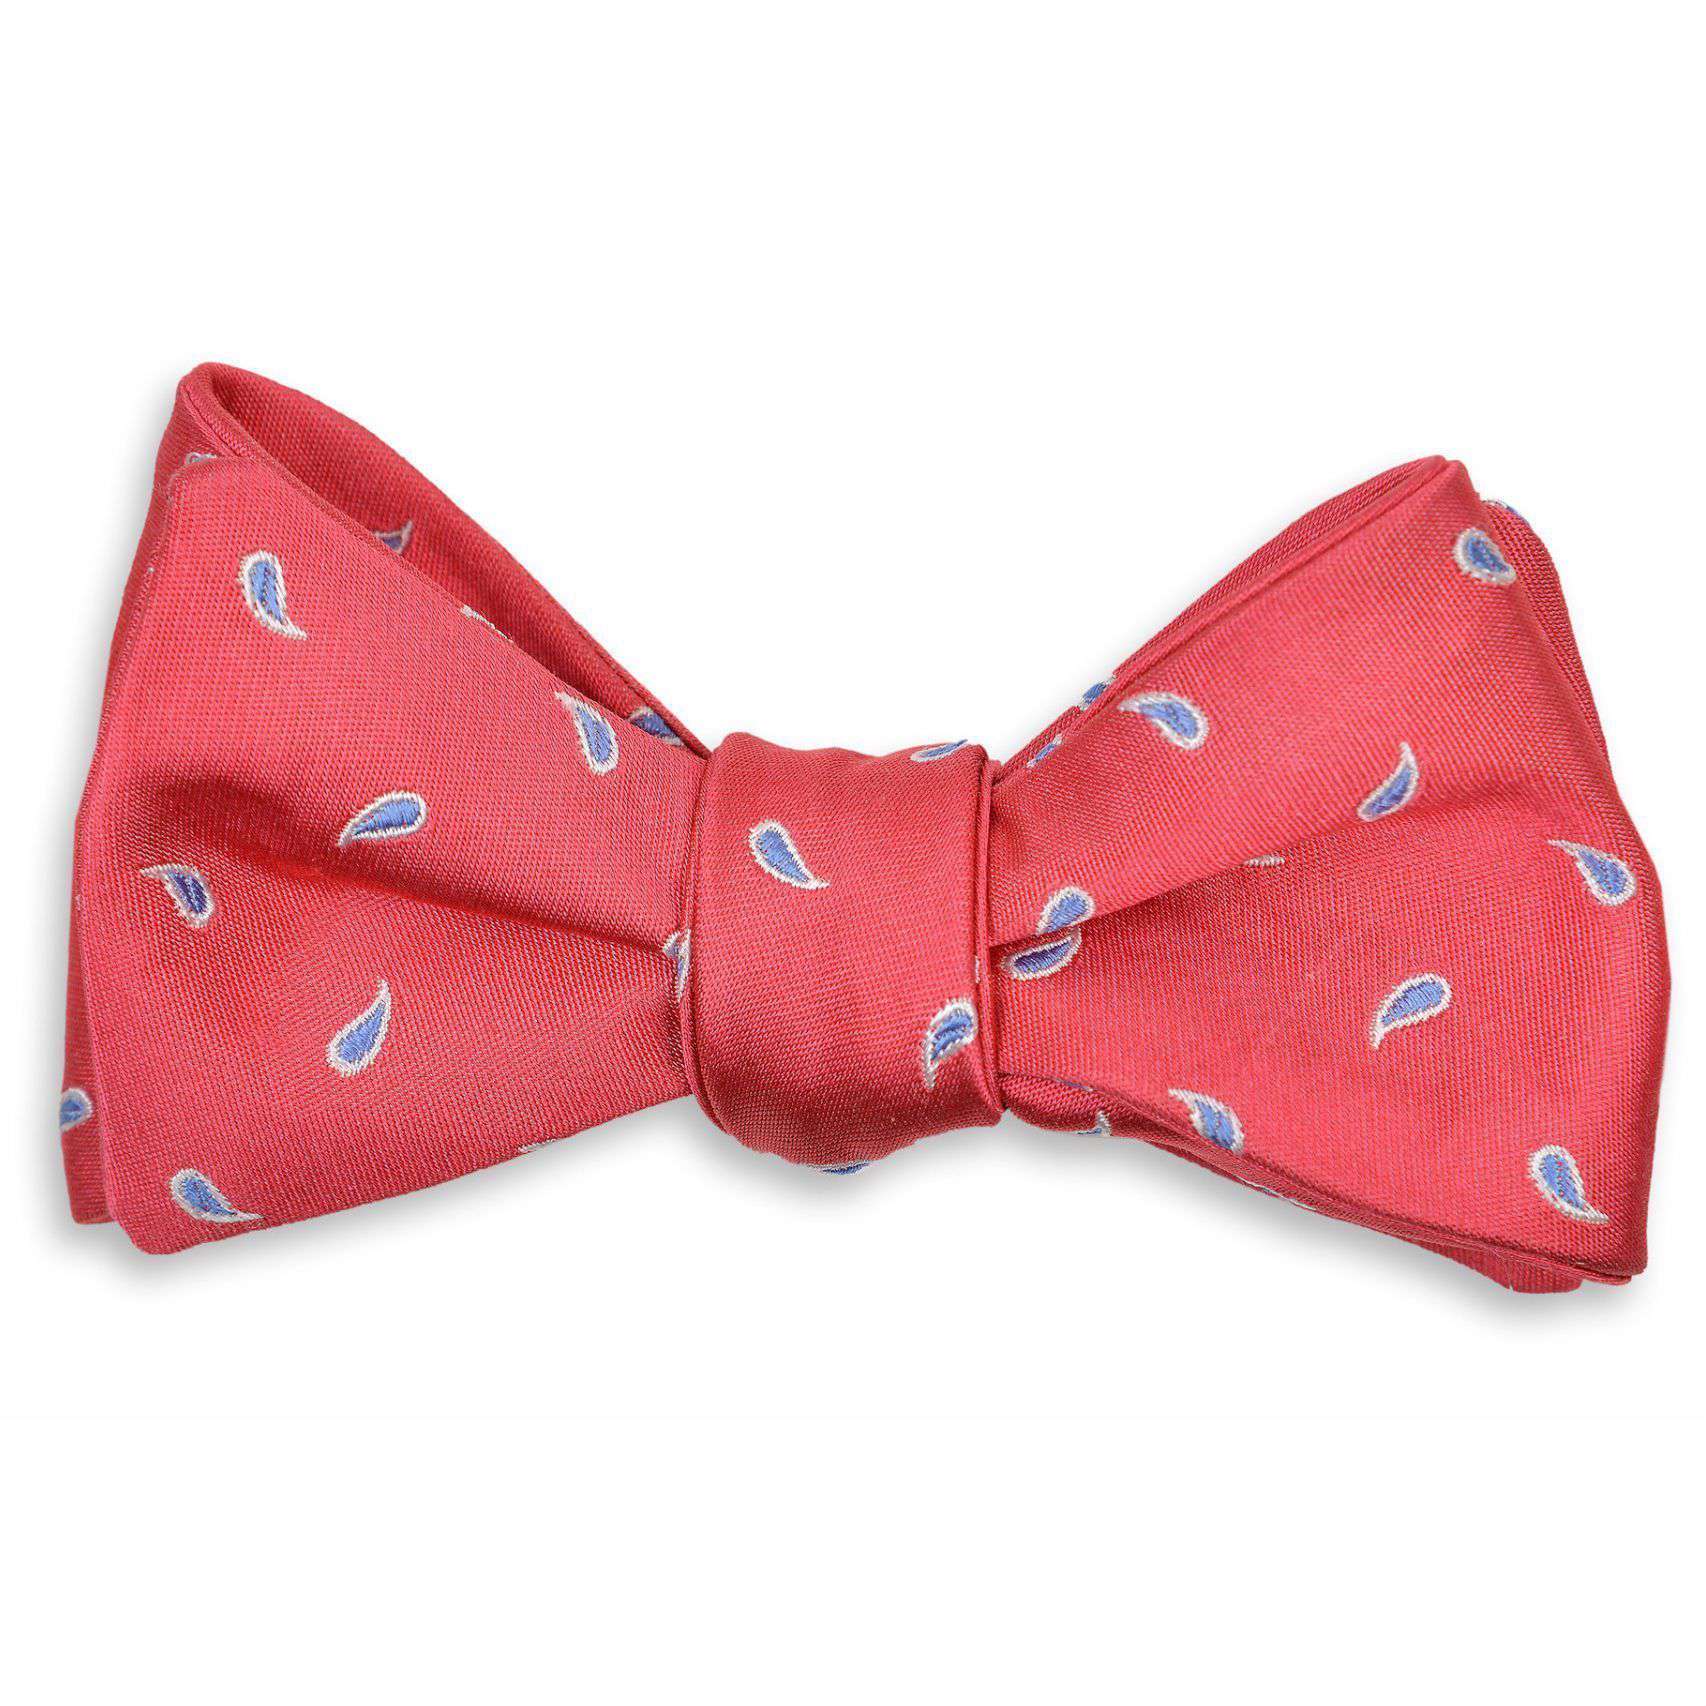 High Cotton Cooper Bow Tie in Coral